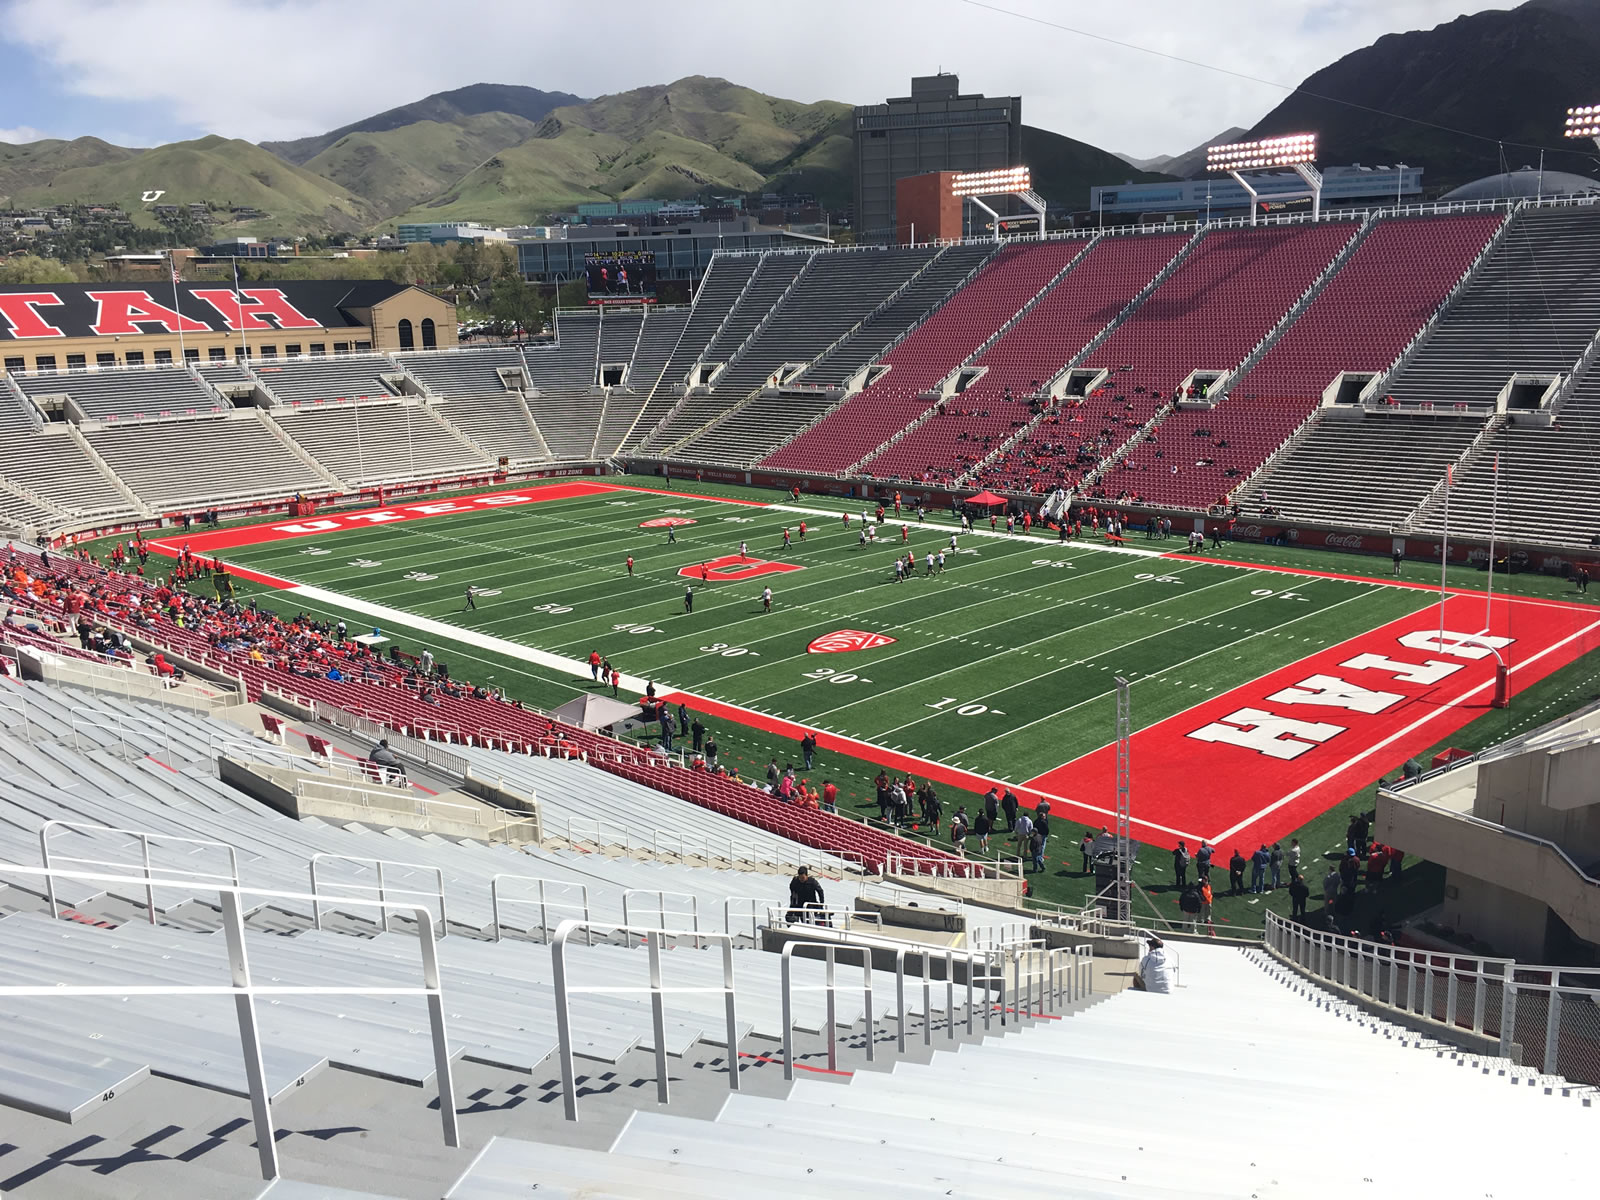 section w6, row 50 seat view  - rice-eccles stadium